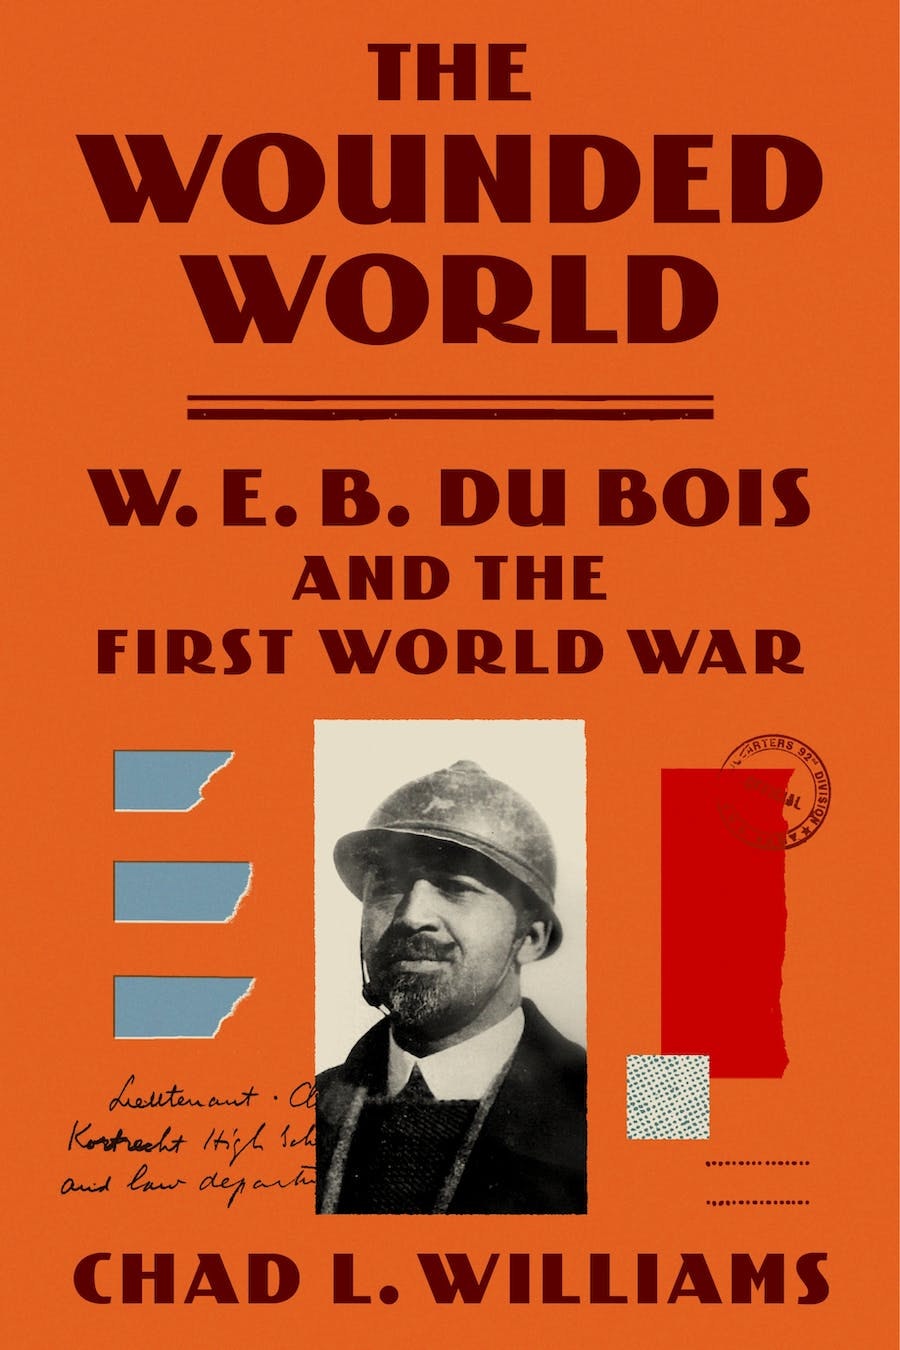 Cover of Williams's book The Wounded World, which has a black-and-white photo of Du Bois wearing a helmet